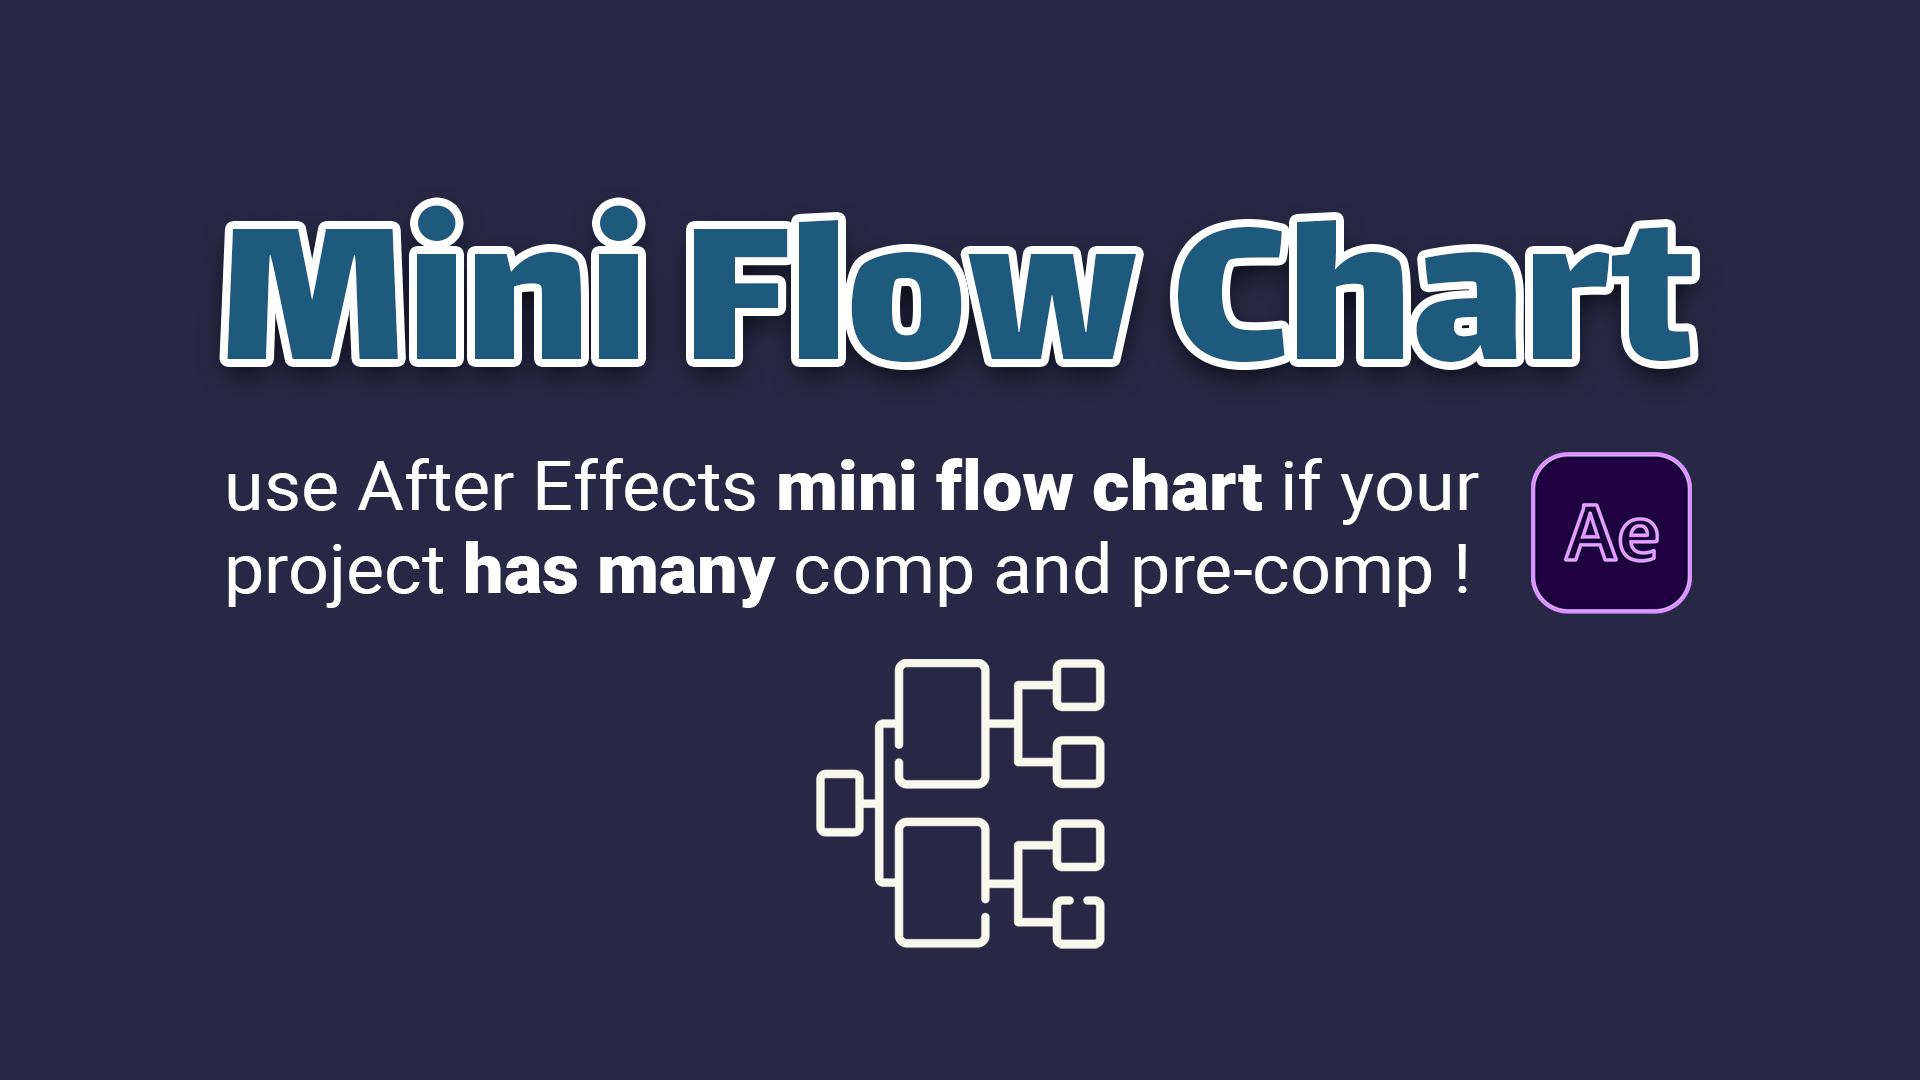 How to use Mini Flow Chart in After Effects